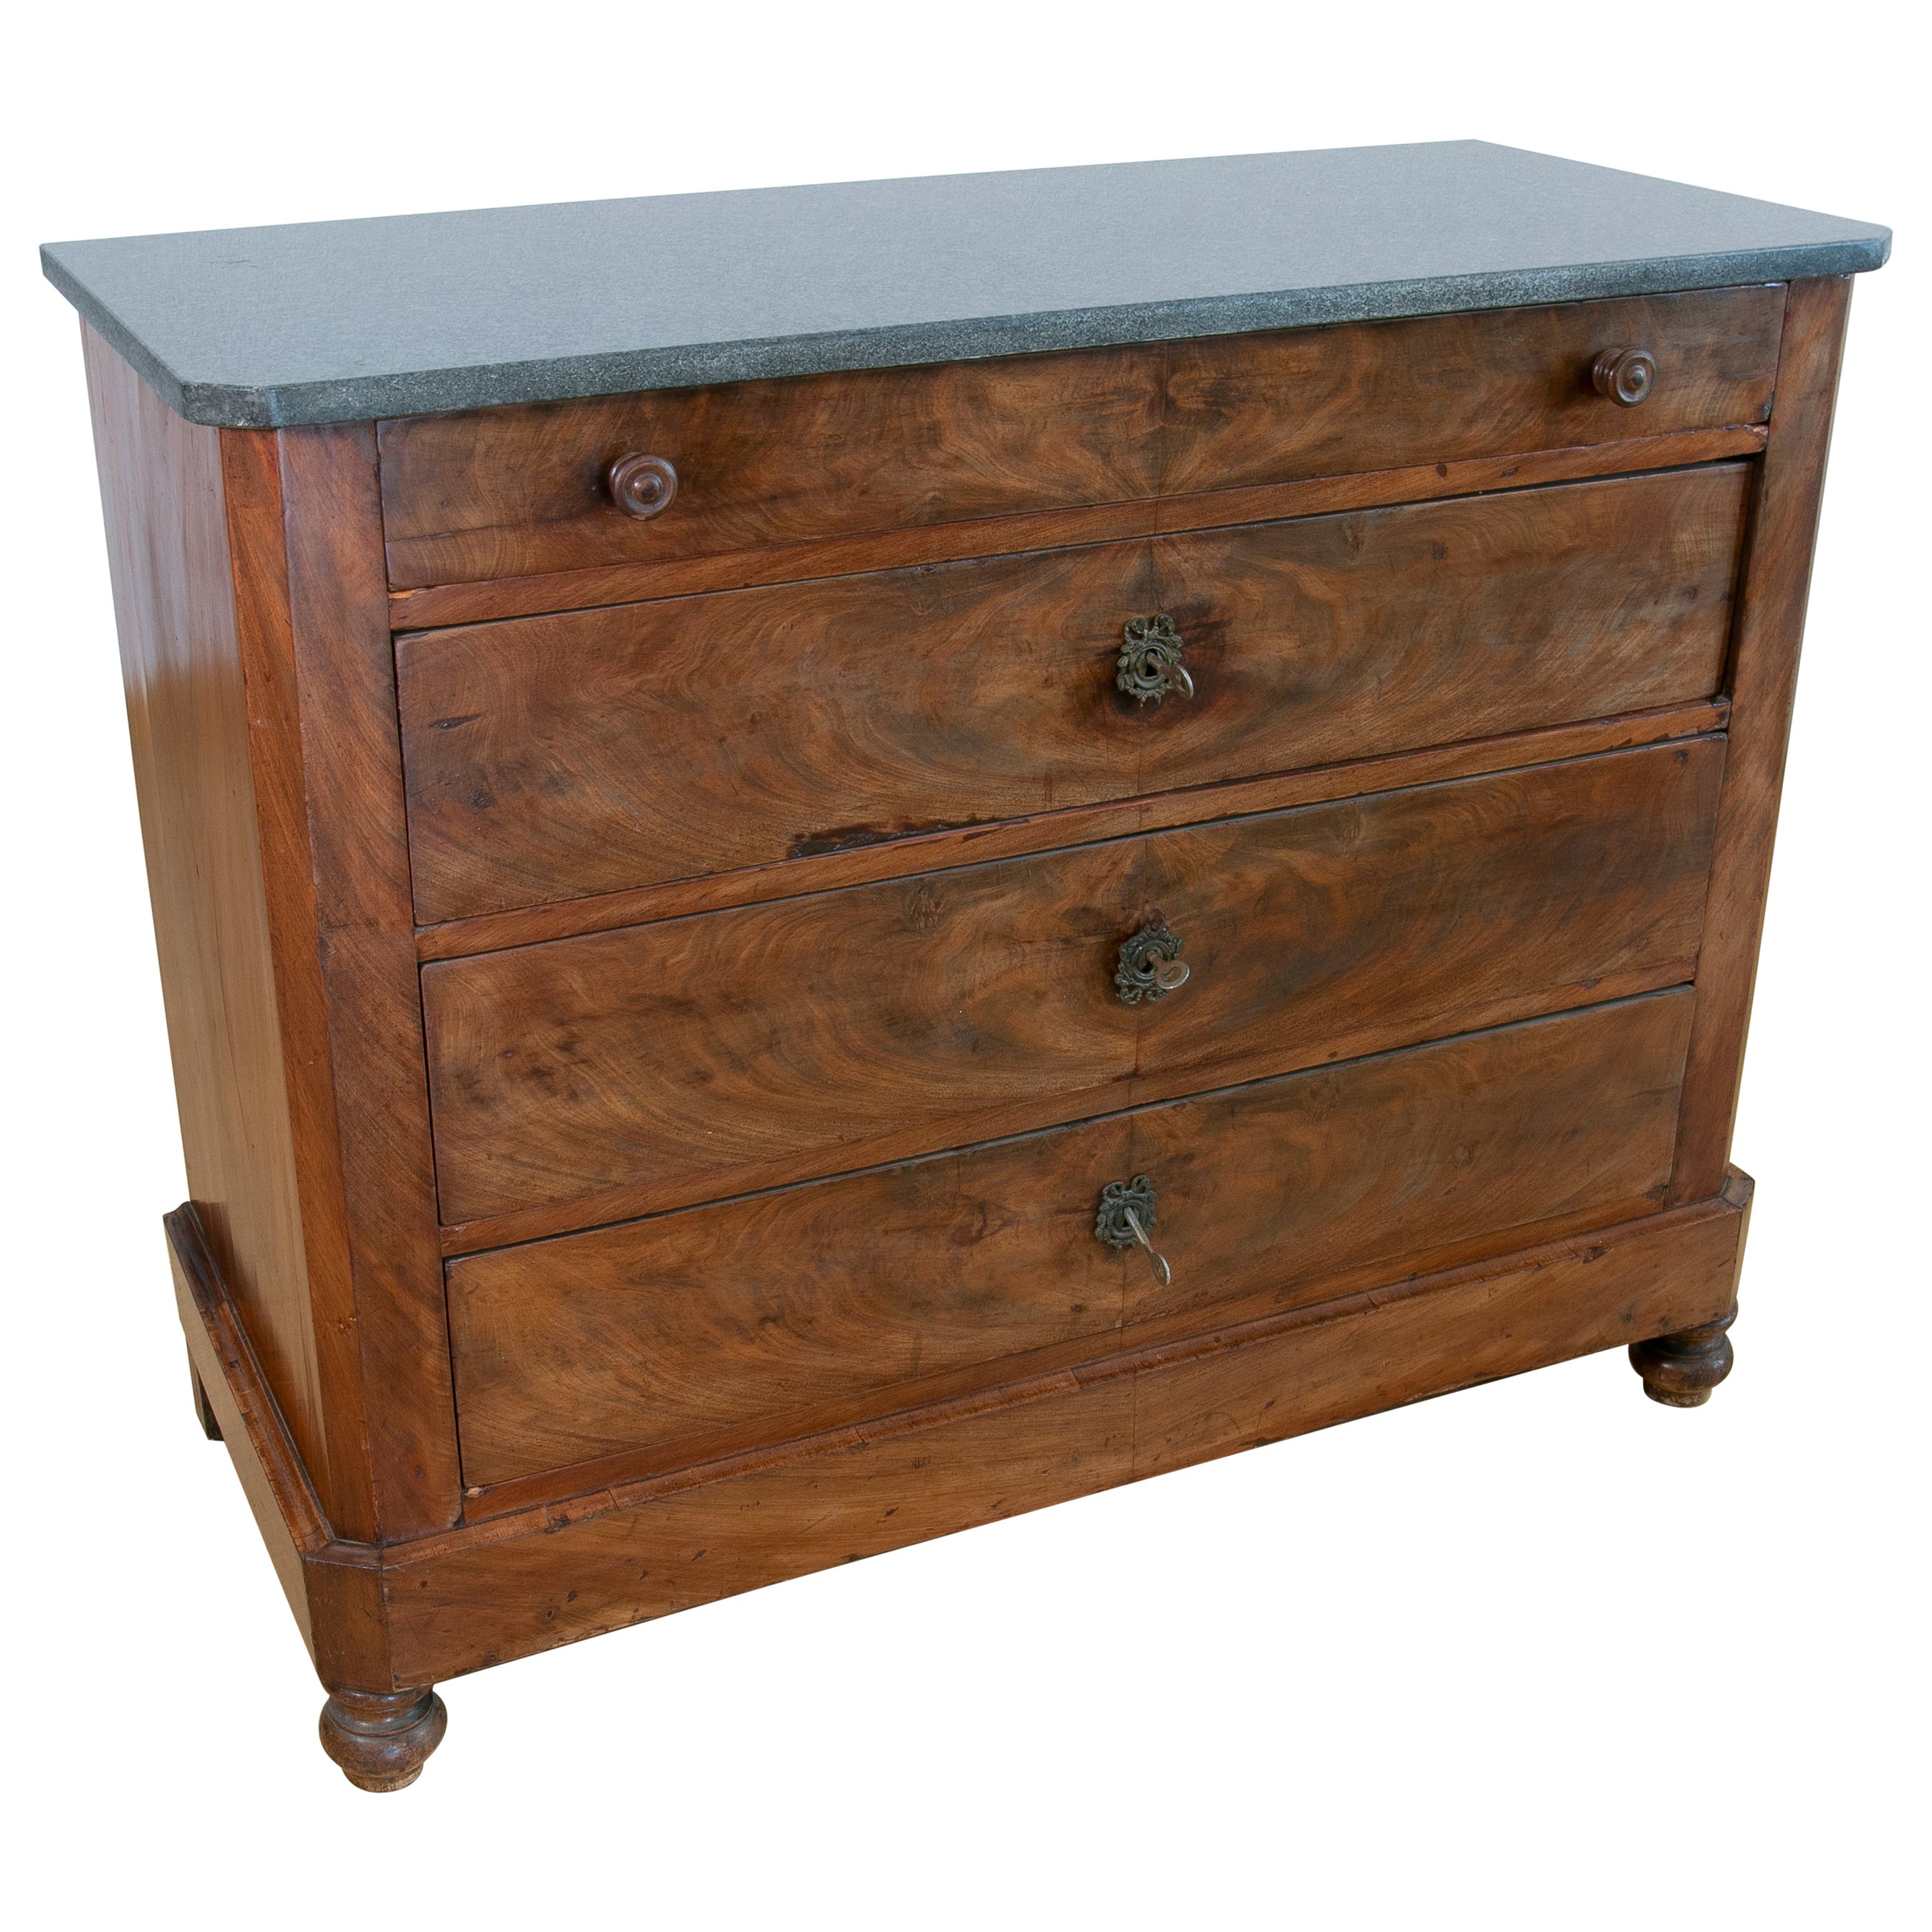 Spanish Mahogany Chest of Drawers with Five Drawers and Iron and Wooden Handles For Sale